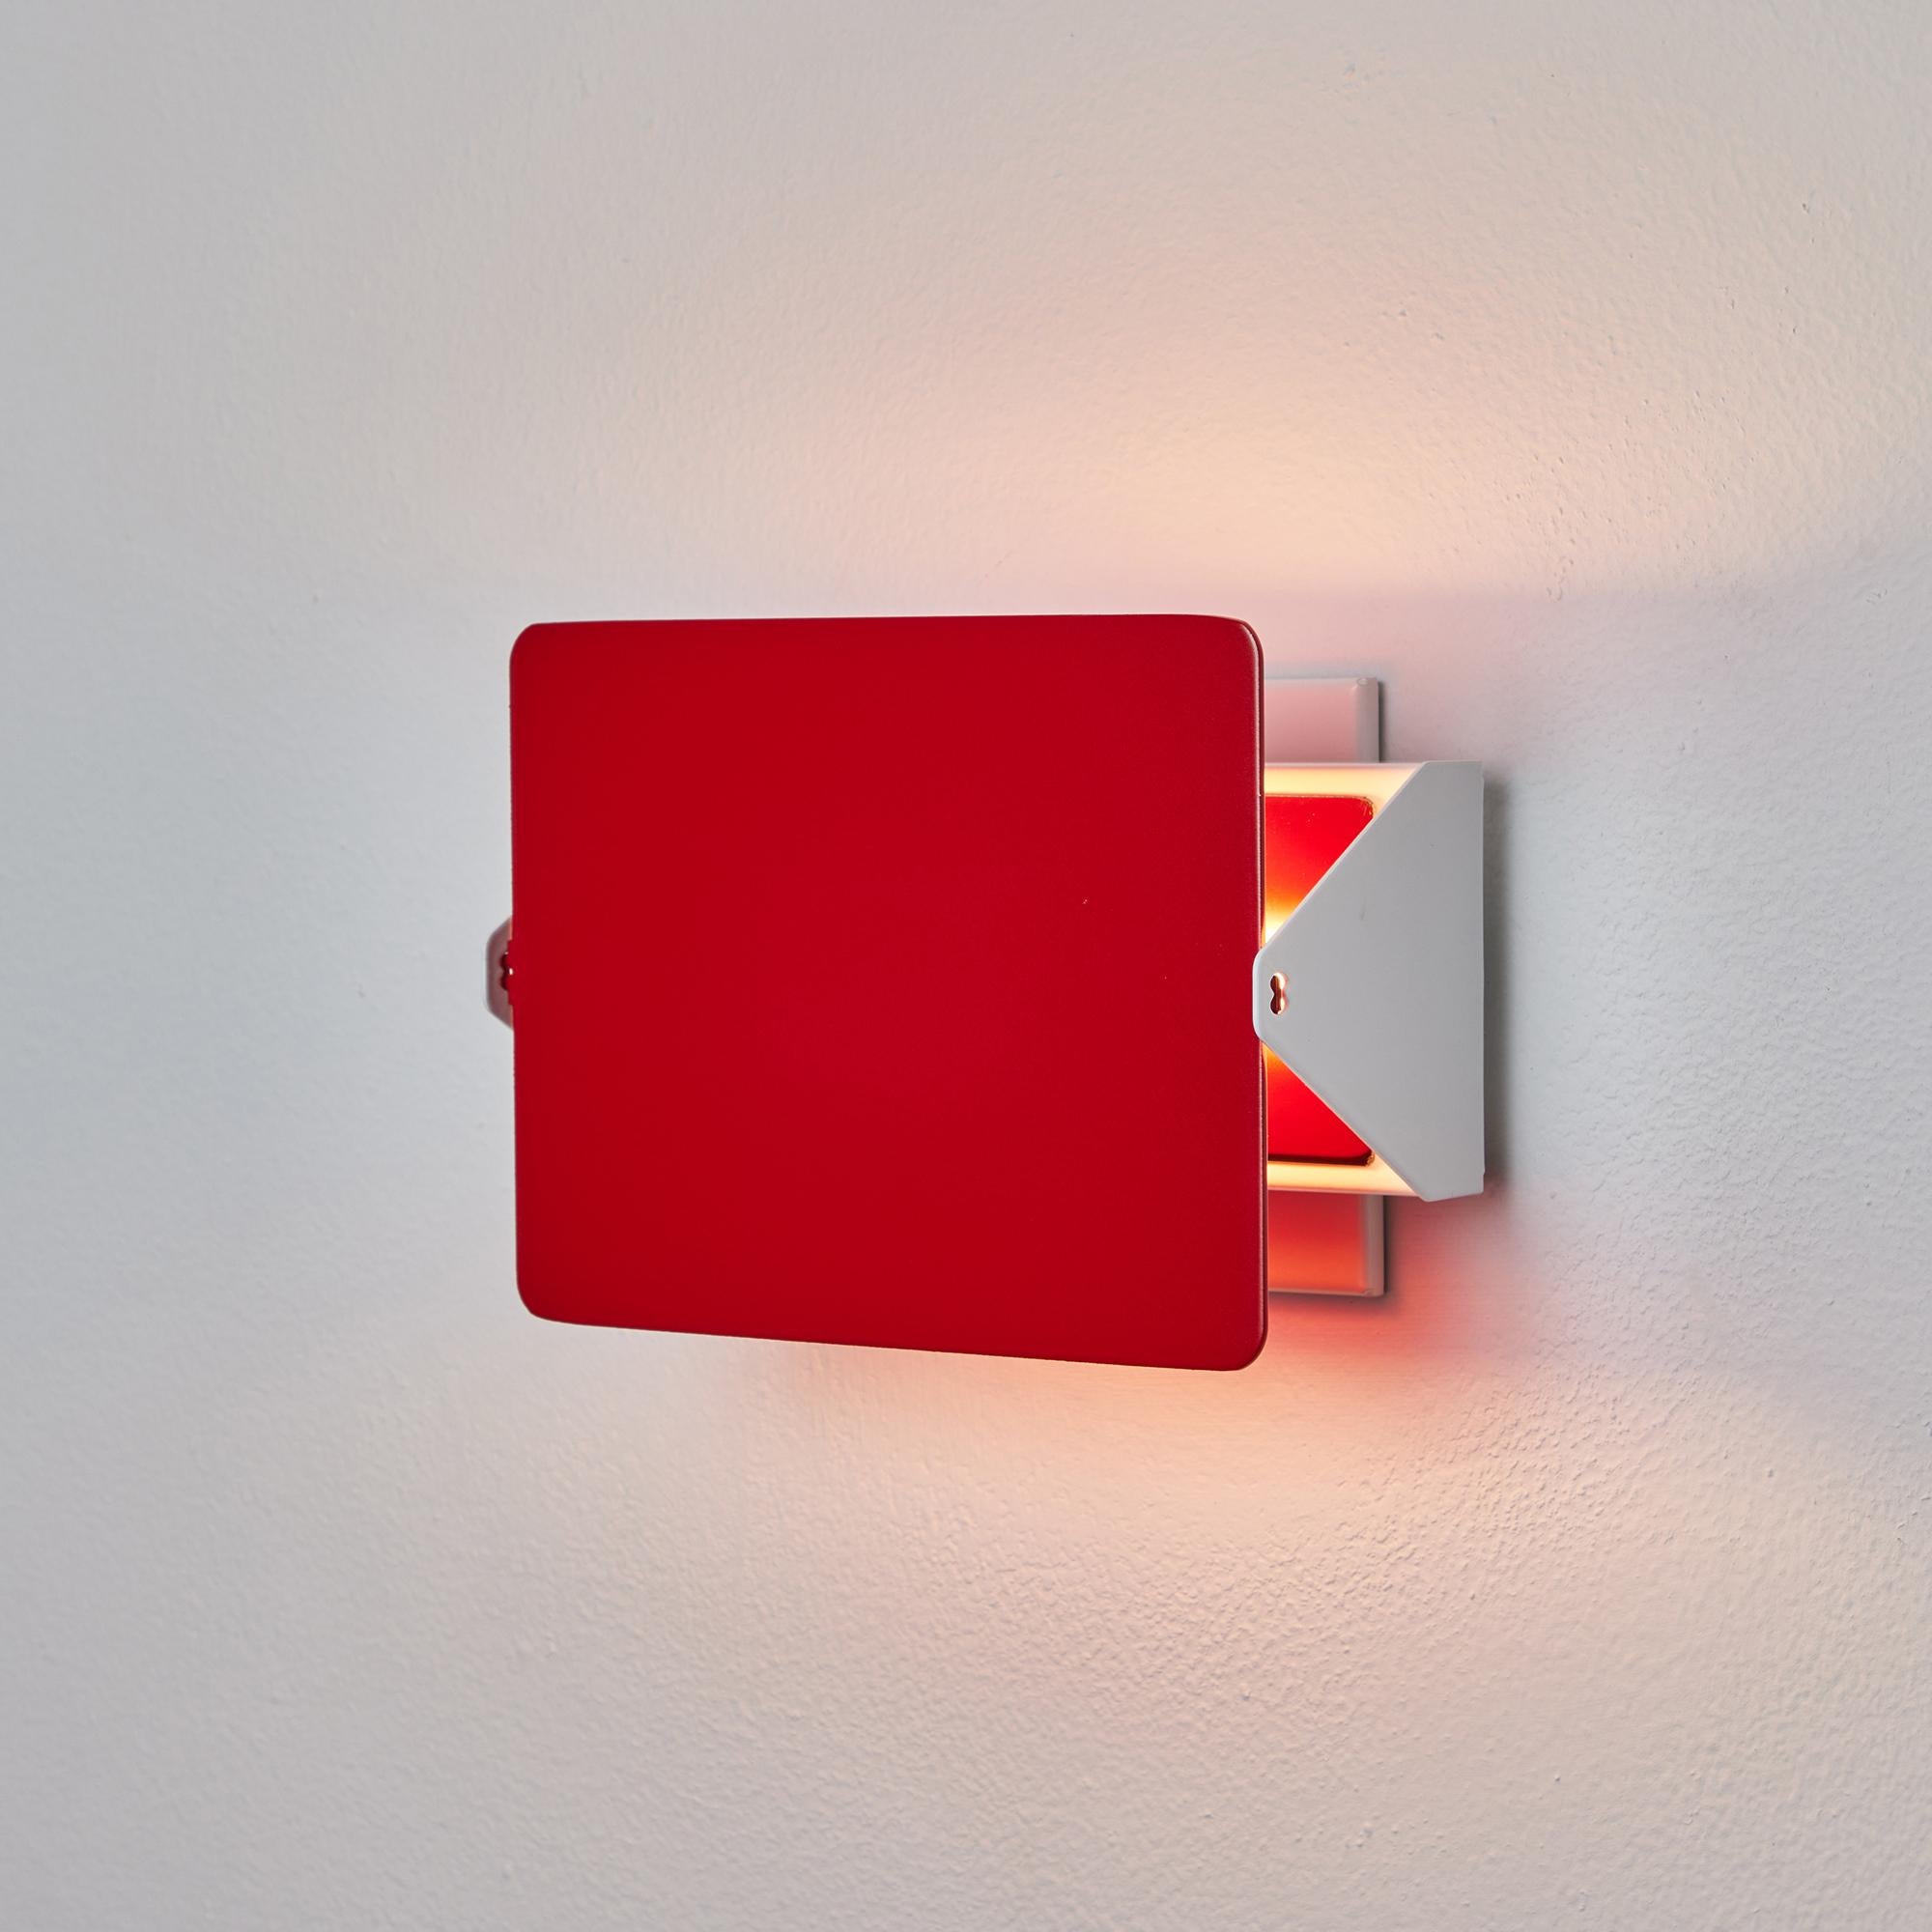 French Charlotte Perriand 'Applique à Volet Pivotant' Wall Light in Red for Nemo For Sale